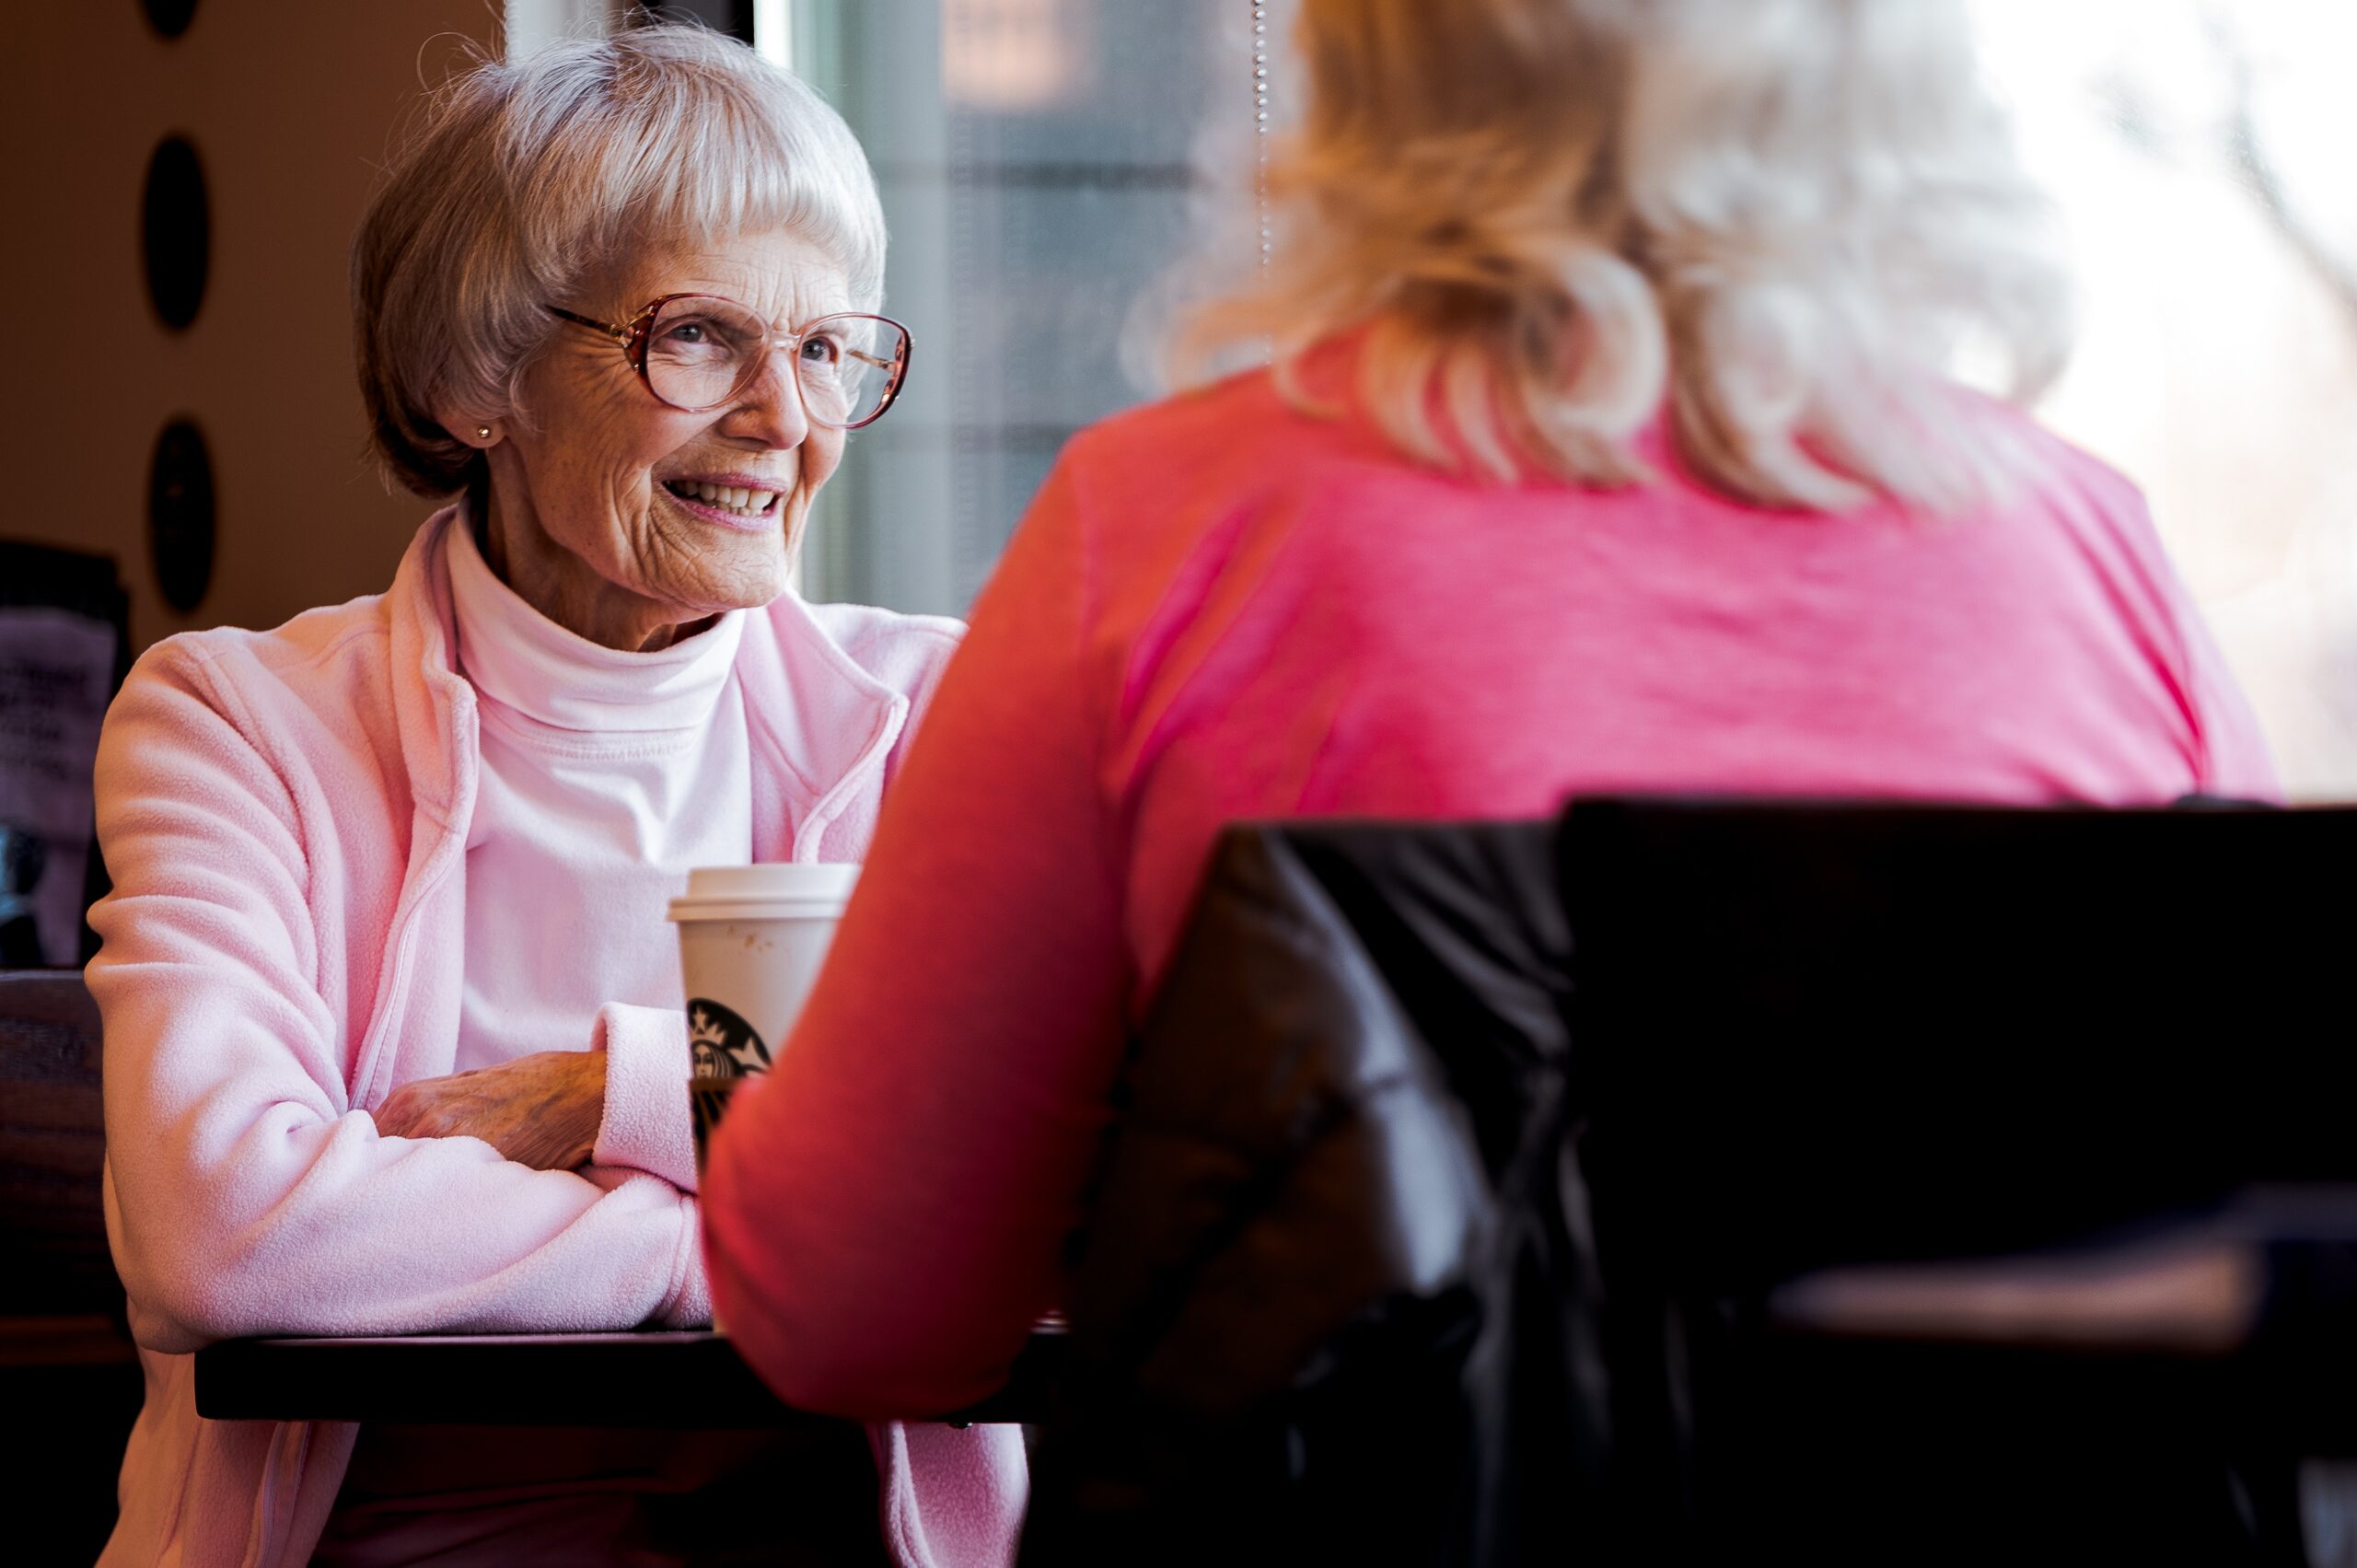 Are You 55+? Here’s Why You Should Join an Active Senior Living Community